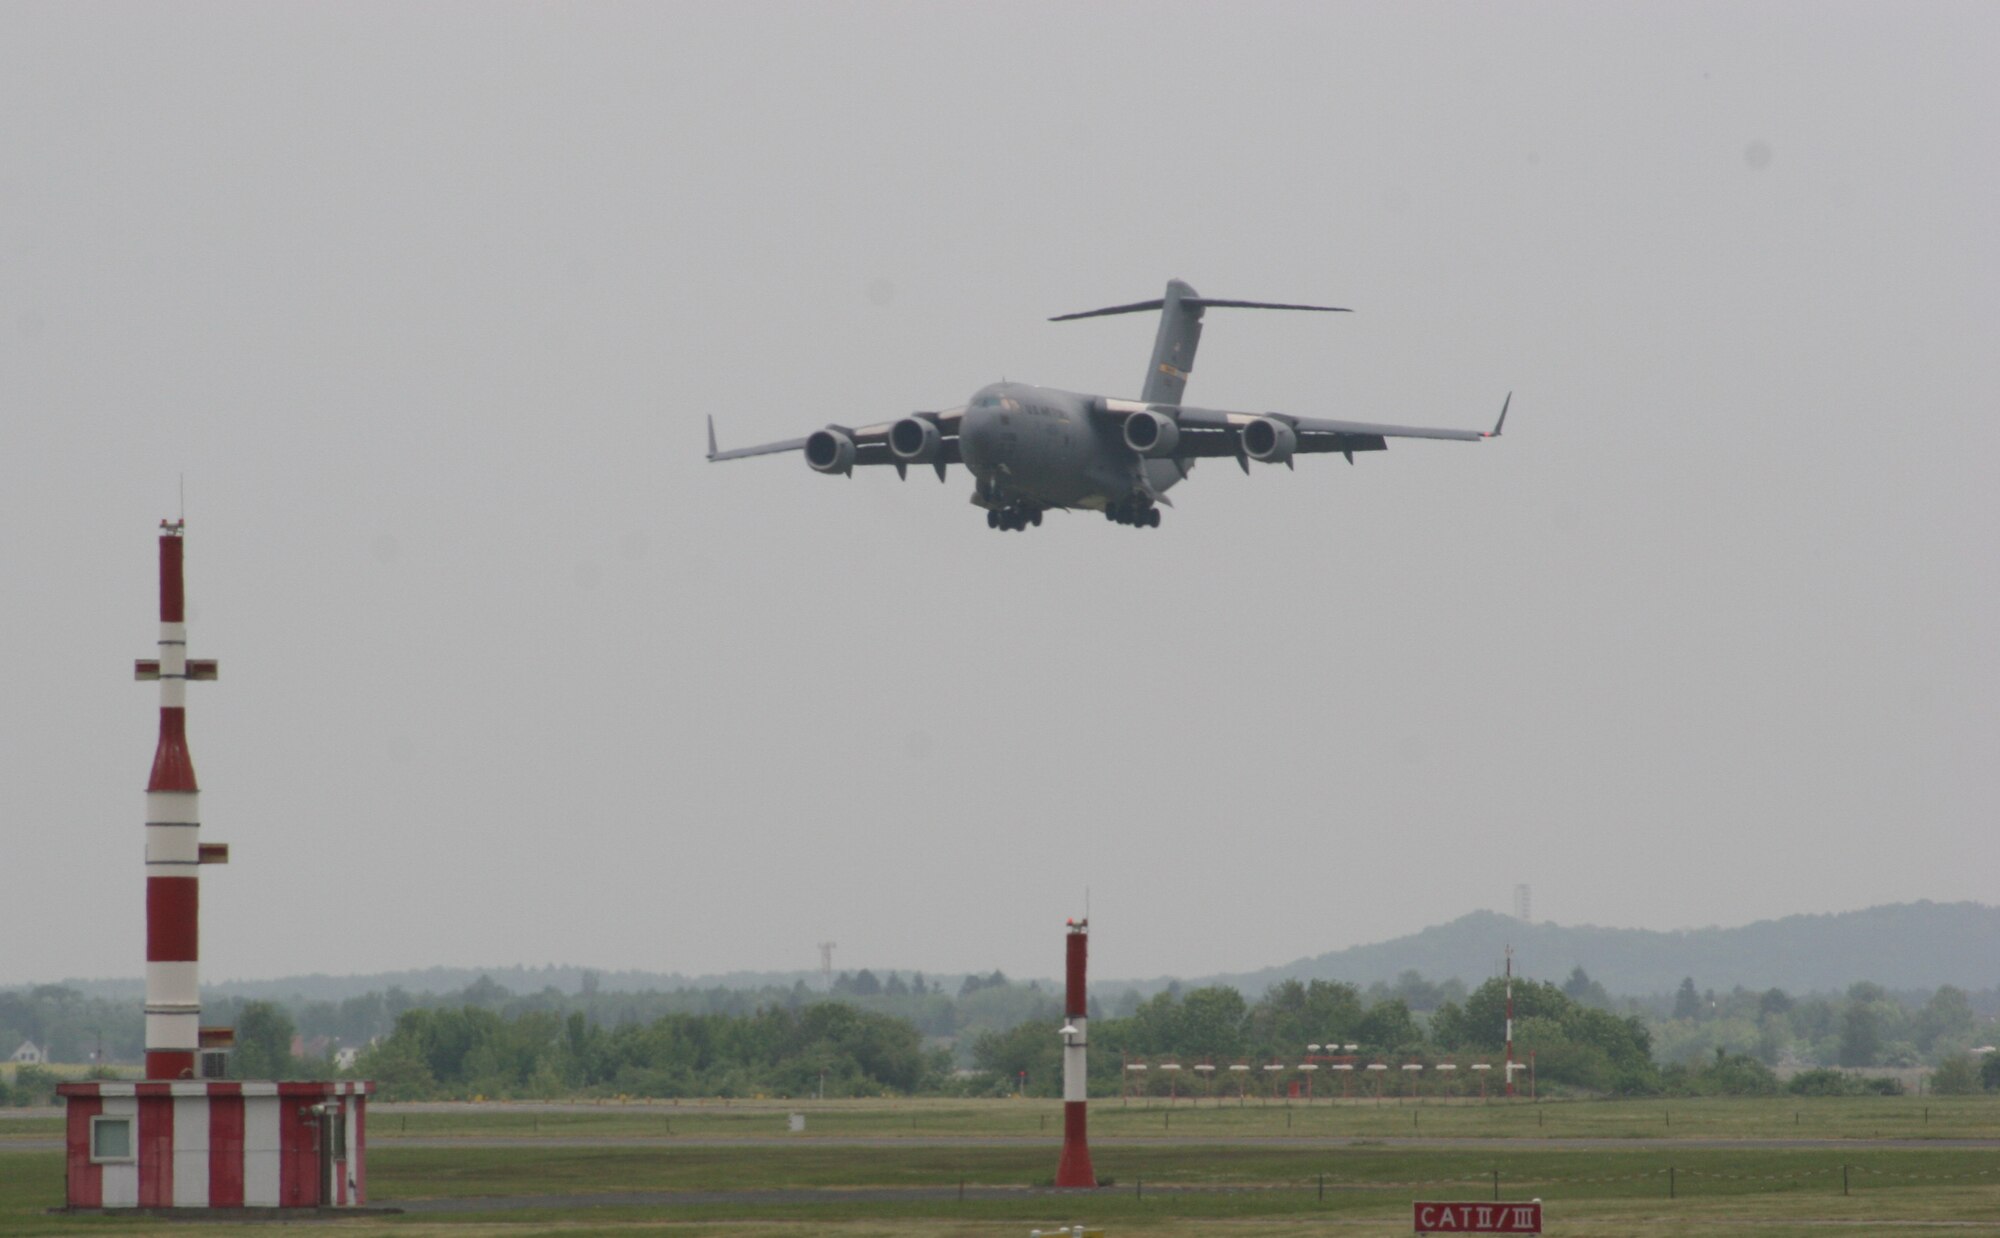 BERLIN, Germany - "The Spirit of Berlin" C-17 Globemaster III lands May 16 after a flight demonstration at the Berlin Air Show. The C-17 from Charleston Air Force Base, S.C., and other Air Force and Army aircraft are attending the air show at Berlin-Schoenefeld Airport May 16-21. The Berlin Air Show is one of the premier events of its type in the world, and U.S. military participation contributes to a number of U.S. security and foreign policy interests. Participation promotes standardization and interoperability of equipment with our NATO allies and other potential coalition partners, highlights the strength of the U.S. commitment to the security of Europe and demonstrates that U.S. industry is producing equipment that will be critical to the success of current and future military operations.  (Photo by Maj. Pamela A.Q. Cook, USAF)
